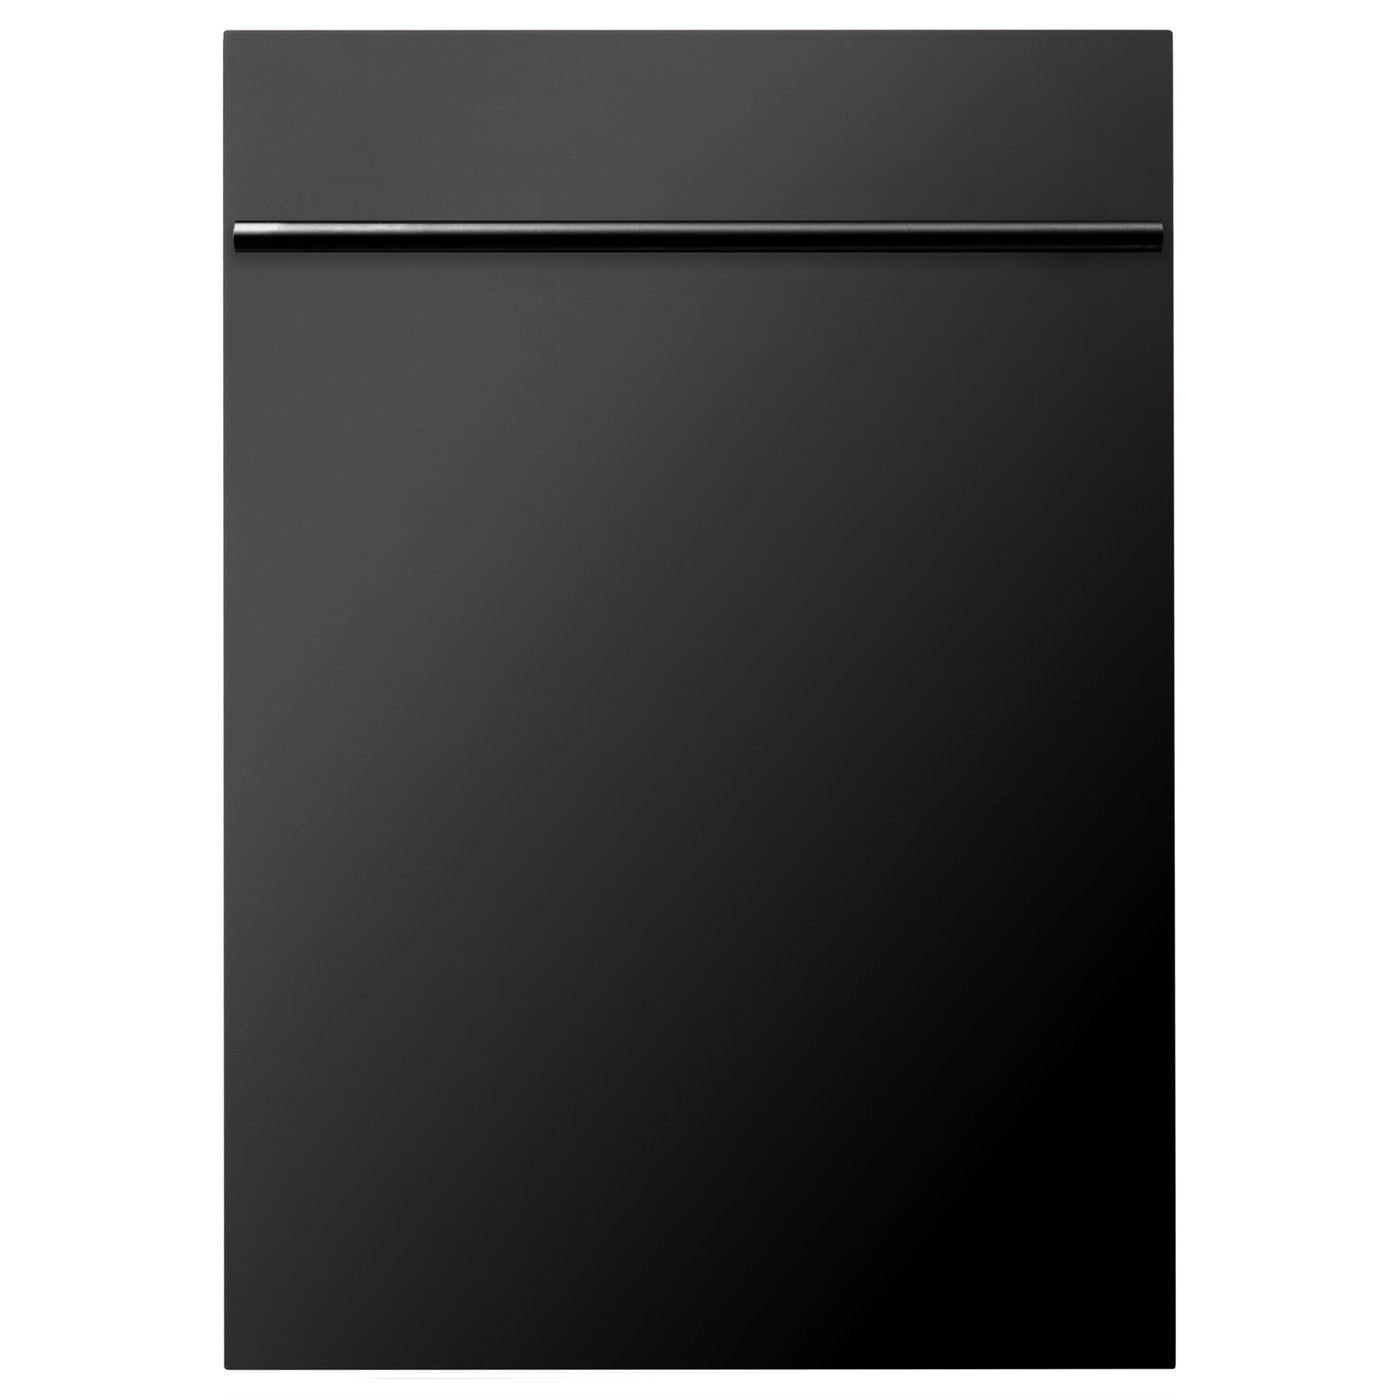 18 inch Compact Top Control Dishwasher 120-Volt with Stainless Steel Tub and Modern Style Handle